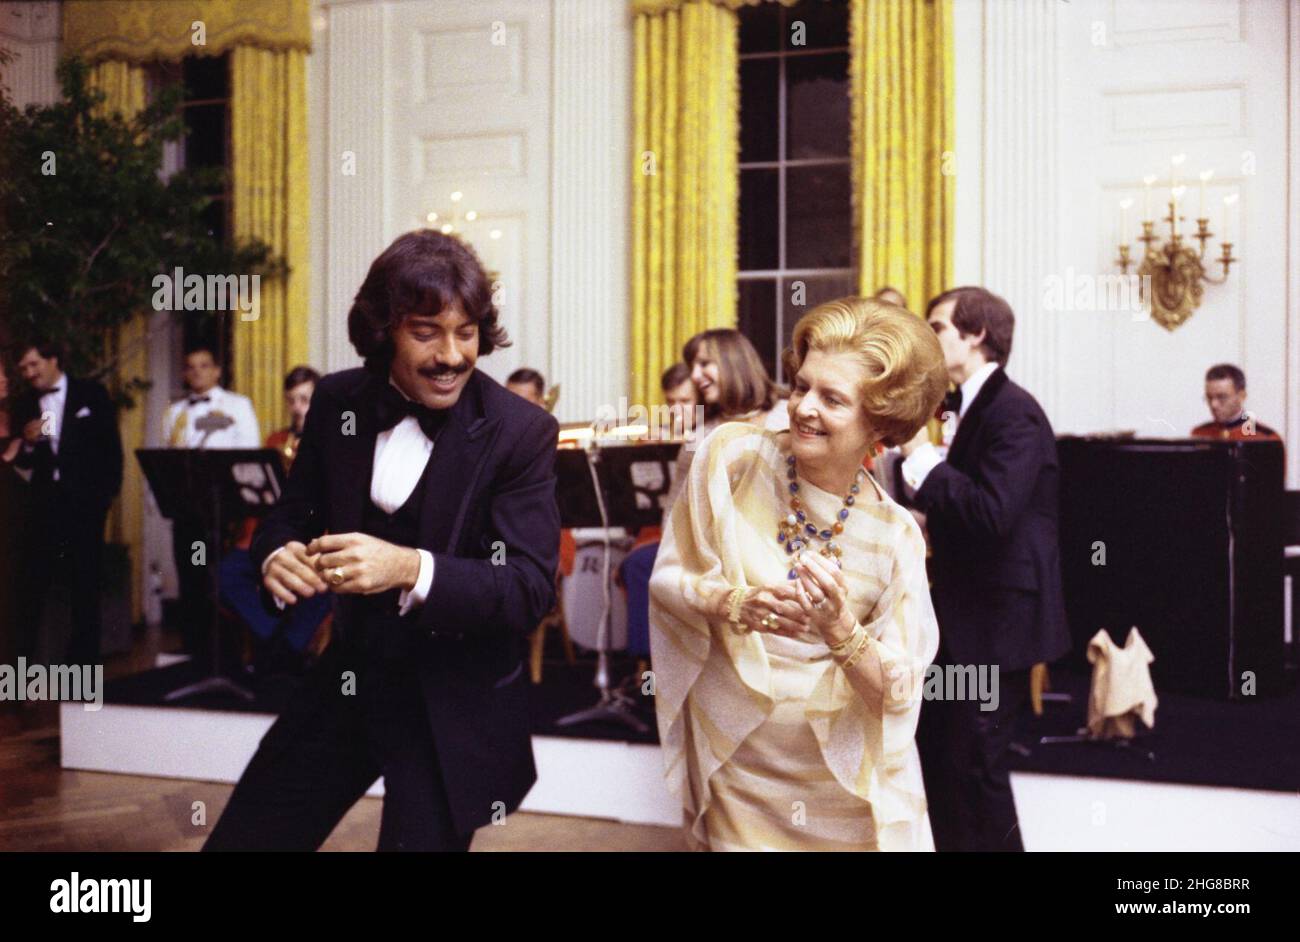 Singer Tony Orlando and First Lady Betty Ford Dancing following a State Dinner Honoring President Kekkonen of Finland Stock Photo